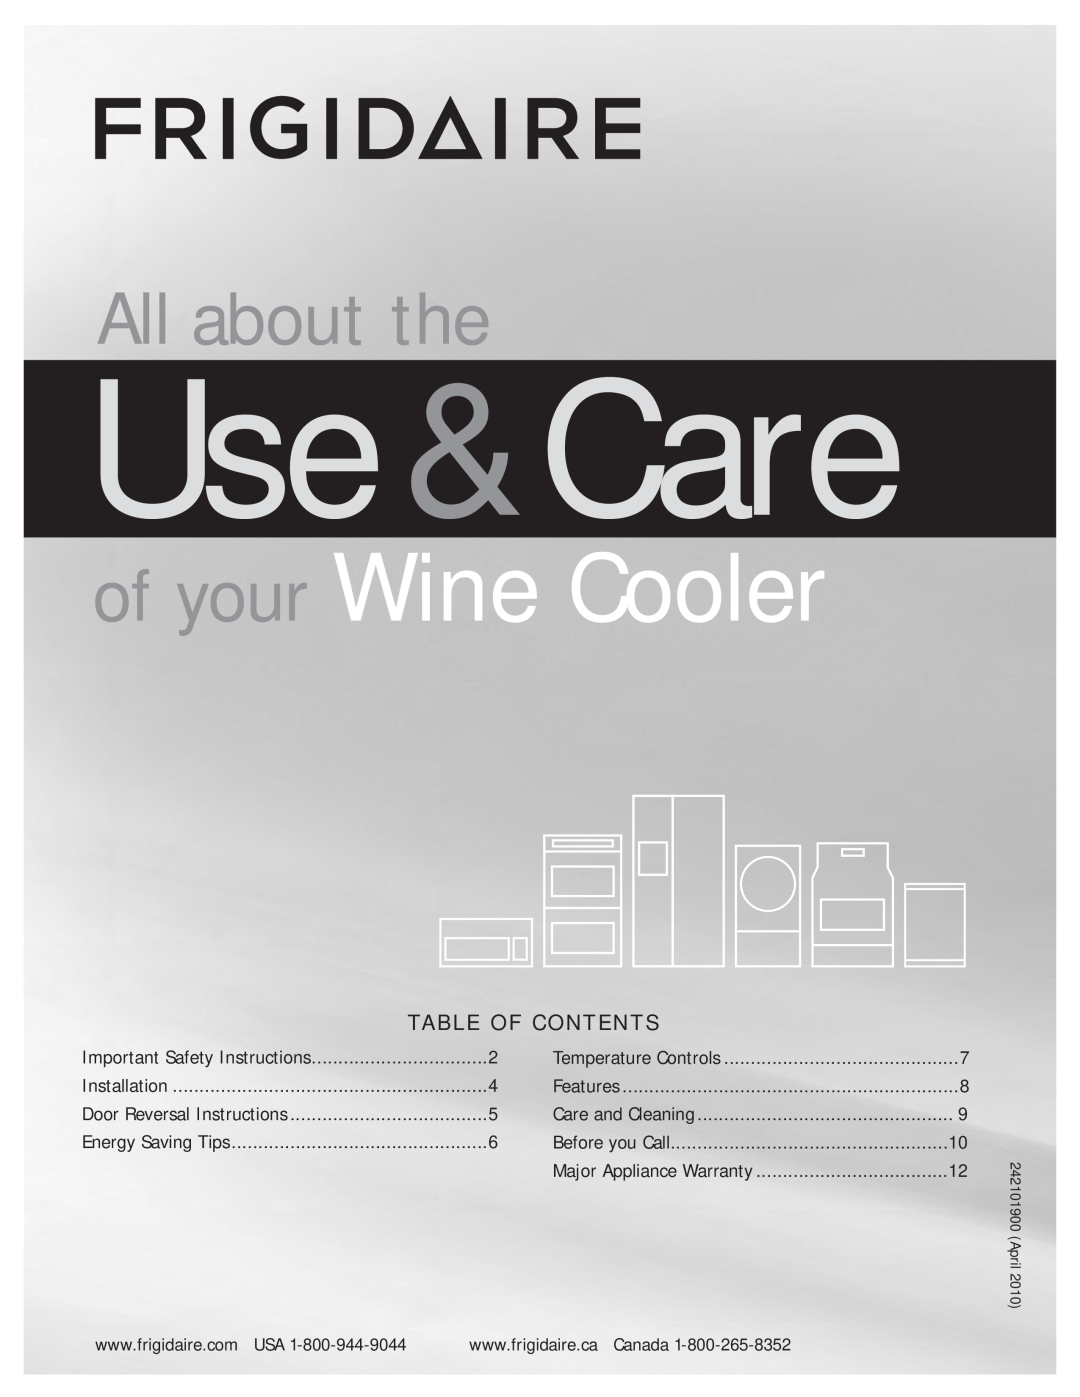 Frigidaire FFWC38F6LS, FFWC42F5LS important safety instructions Use &Care, of your Wine Cooler, All about the, Features 